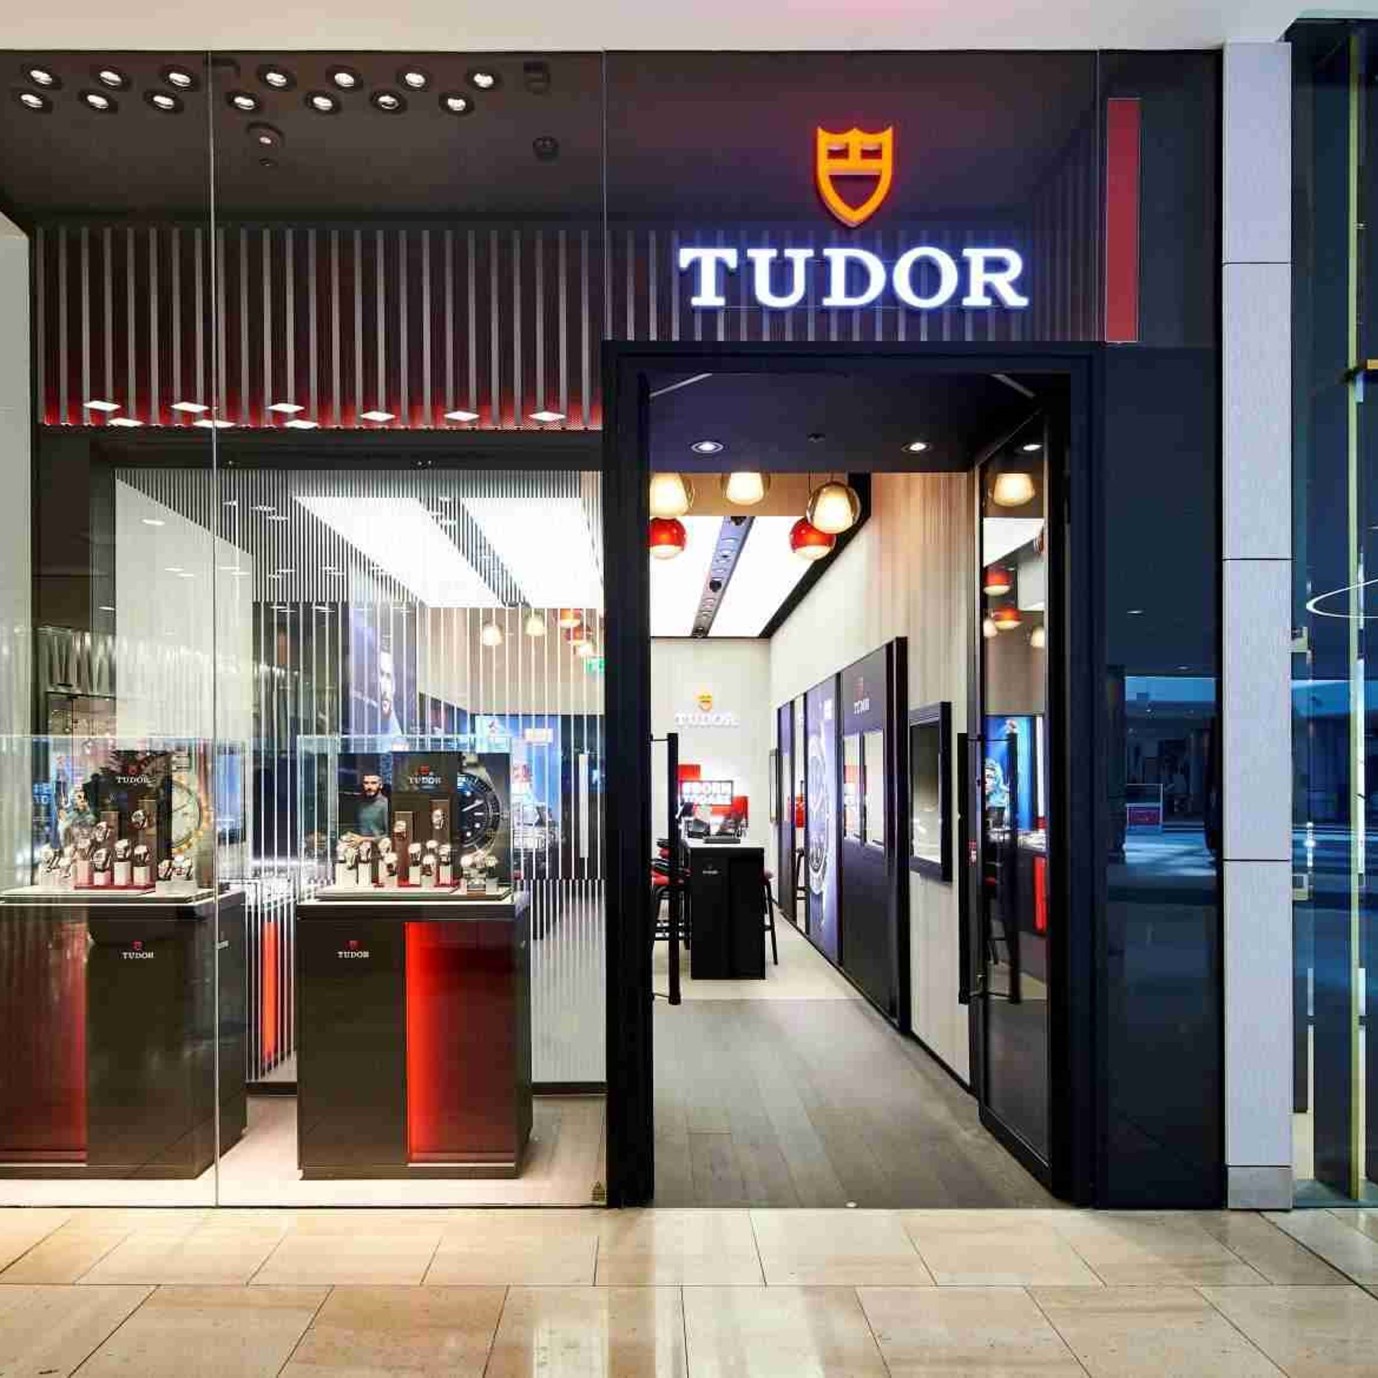 Tudor - Our brand partners - Group - The Watches of Switzerland Group